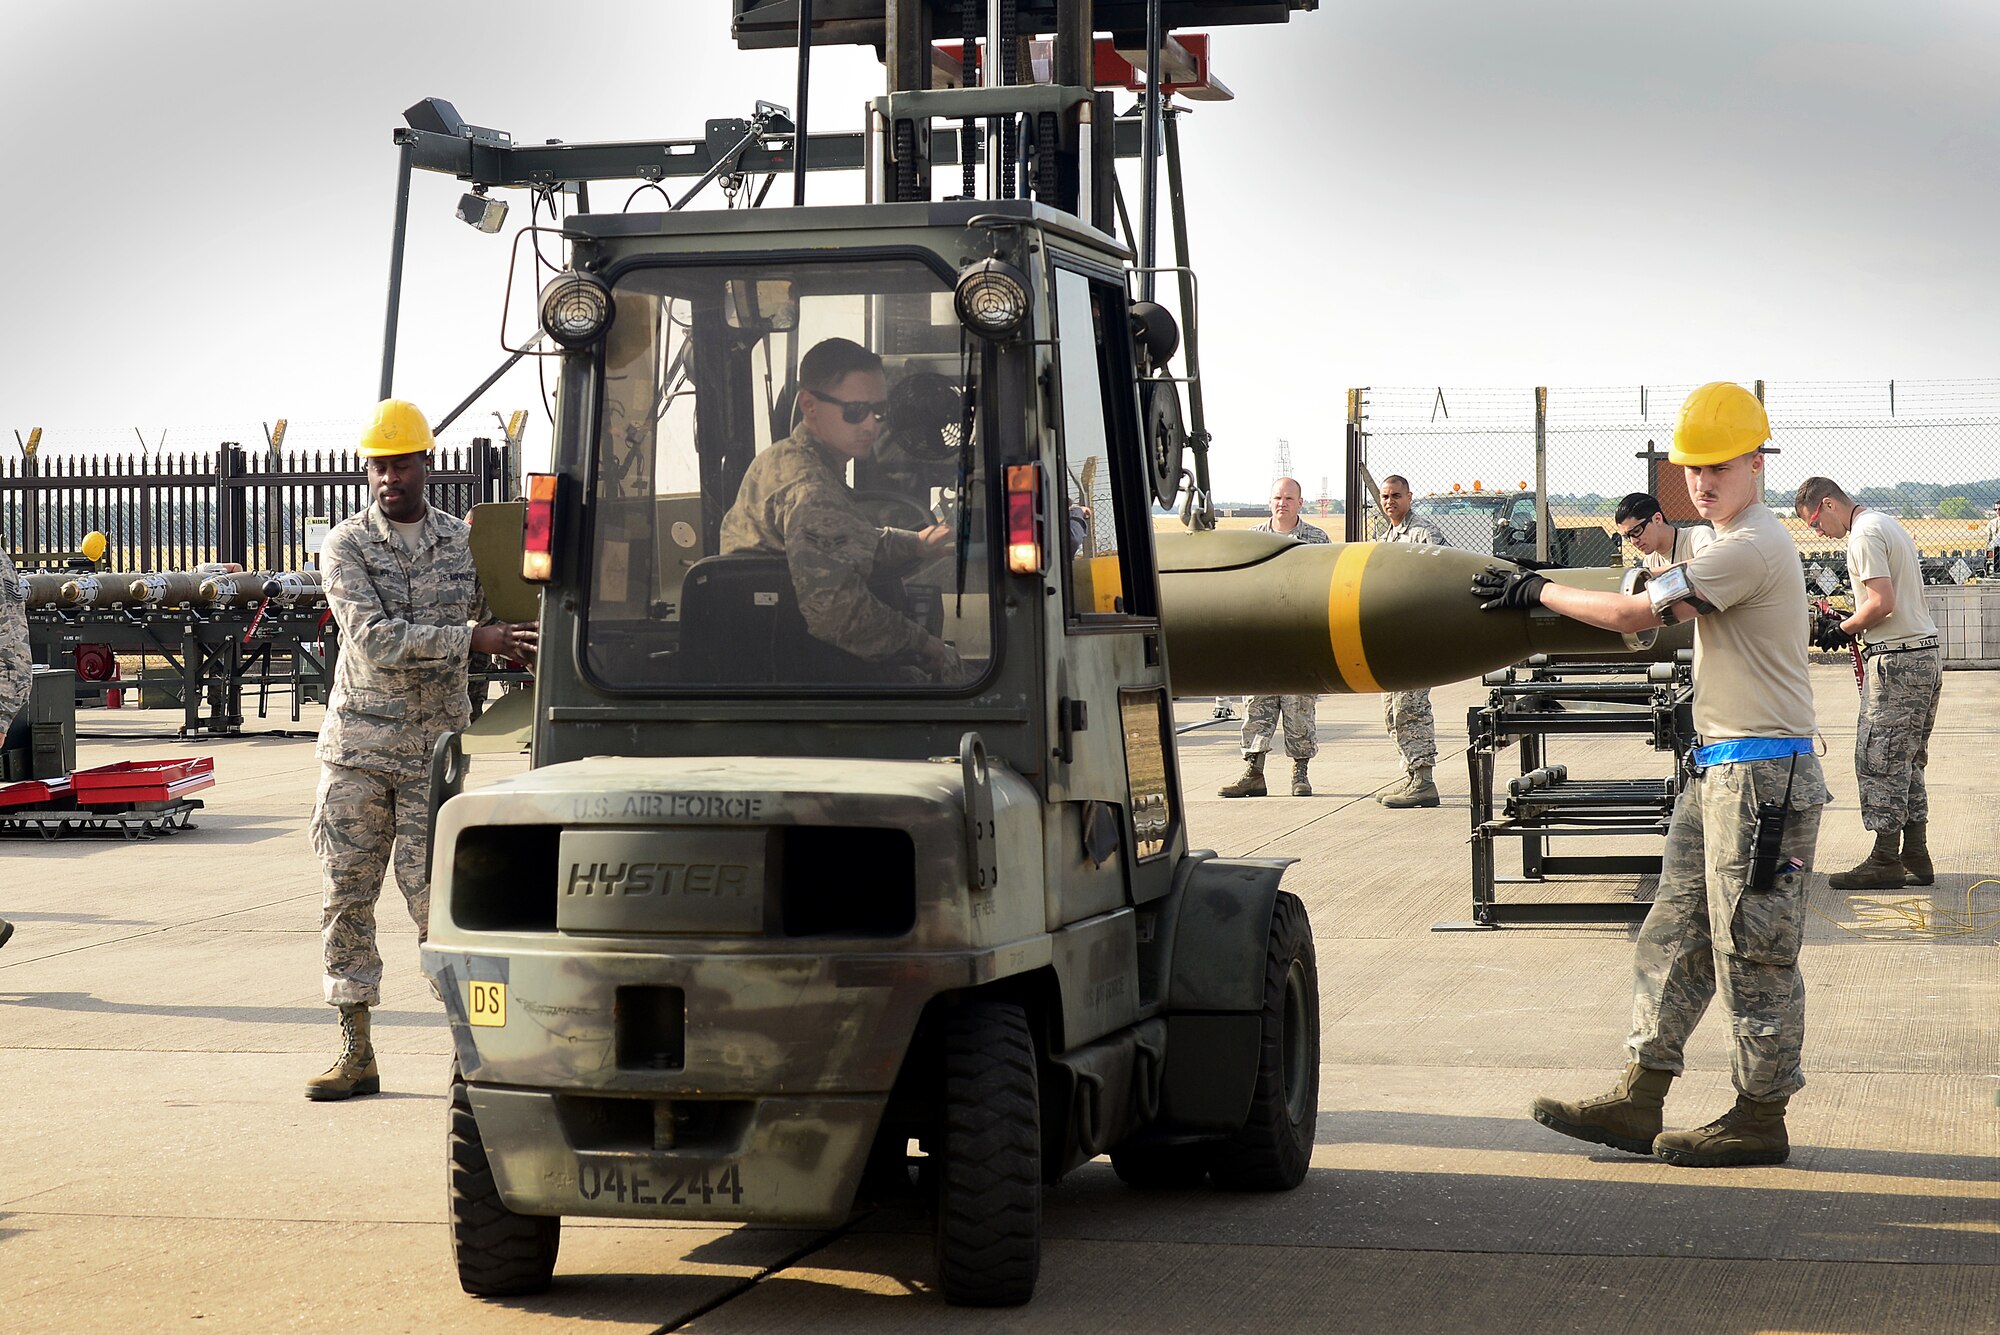 U.S. Air Force Munitions Airmen prepare a GBU-24 Paveway III laser-guided bomb for transport during the United States Air Forces in Europe-Air Forces Africa’s inaugural Combat Ammunition Production Exercise July 17, 2018. The 48th Fighter Wing Maintenance Group hosted approximately 160 Airmen from the 9th Munitions Squadron, Beale Air Force Base, Calif., 31st MXG, Aviano Air Base, Italy, 52nd MXG, Spangdahlem AB, Germany, 86th Logistics Readiness Group, Ramstein AB, Germany, and the 422nd Air Base Group, 501st Combat Support Wing, RAF Alconbury, England to participate in the training. (U.S. Air Force photo/ Tech. Sgt. Matthew Plew)